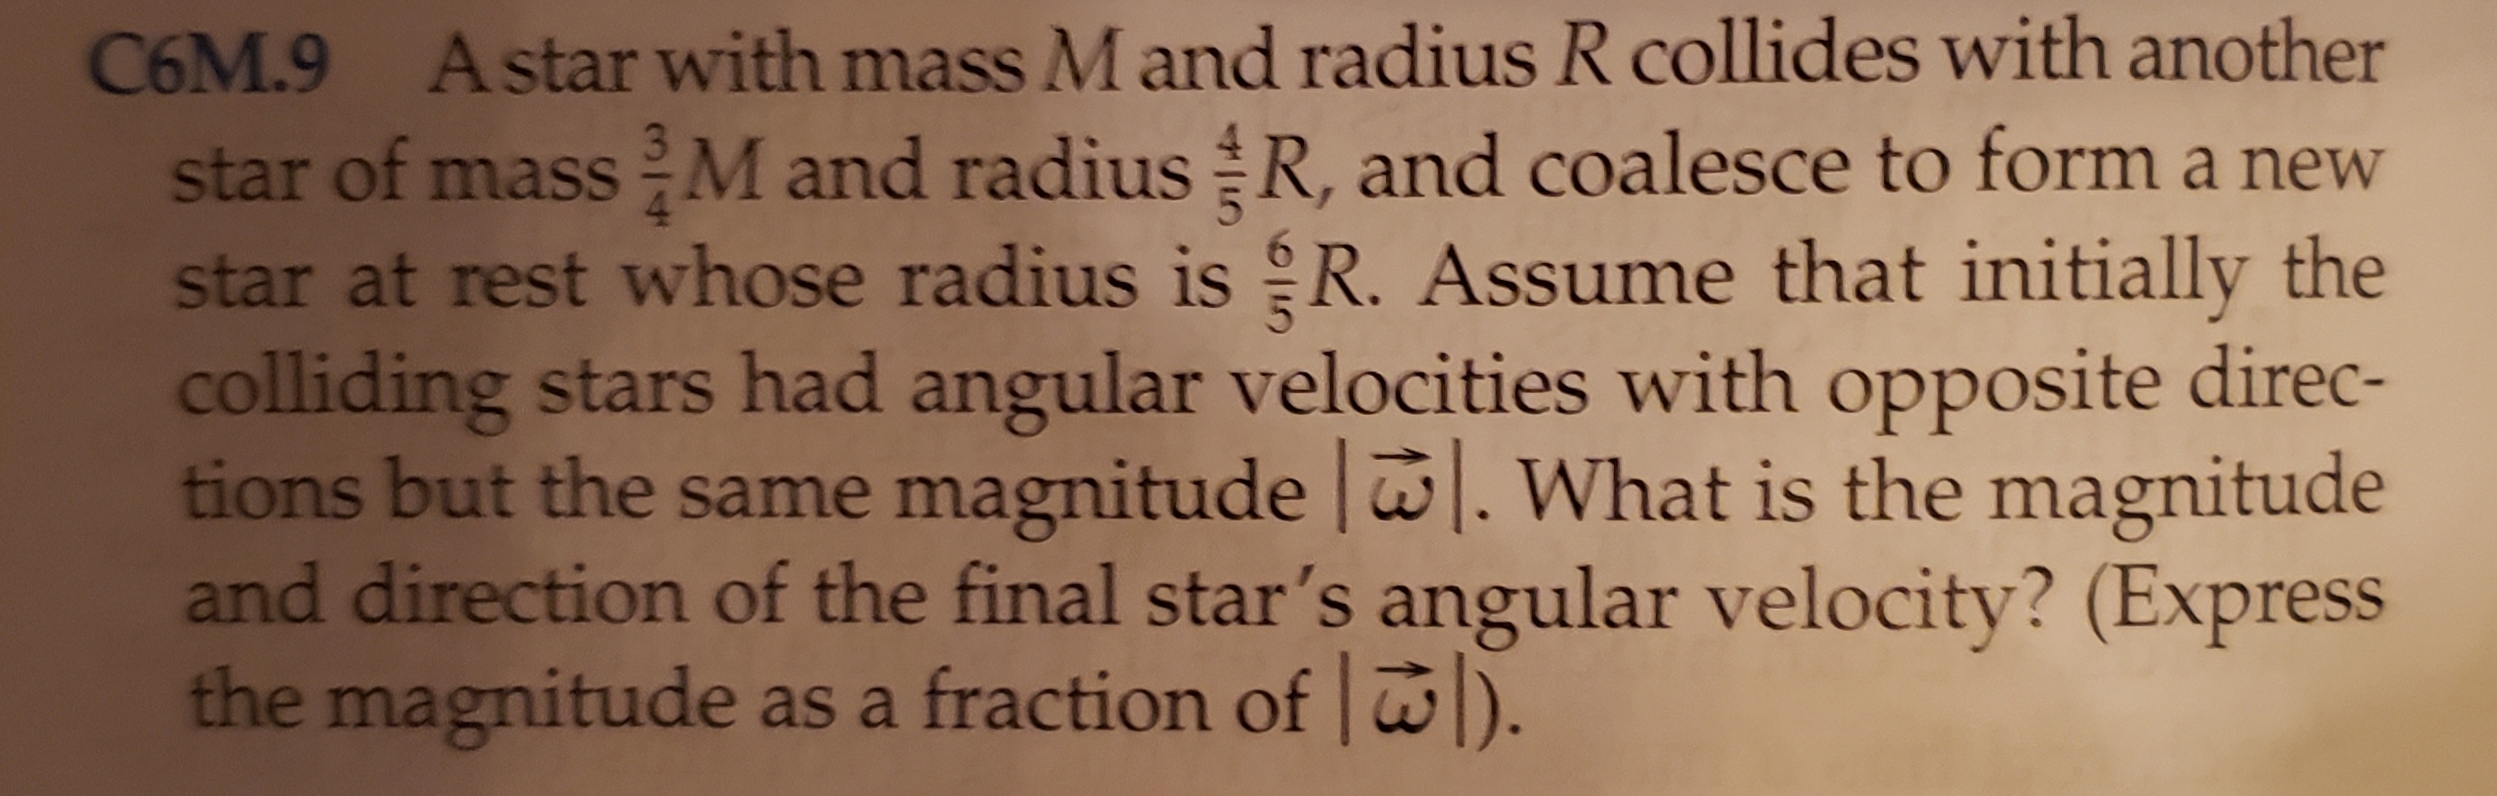 C6M.9 Astar with mass M and radius R collides with another
star of massM and radius R, and coalesce to form a new
star at rest whose radius is R. Assume that initially the
colliding stars had angular velocities with opposite direc-
tions but the same magnitude | What is the magnitude
and direction of the final star's angular velocity? (Express
the magnitude as a fraction of )
